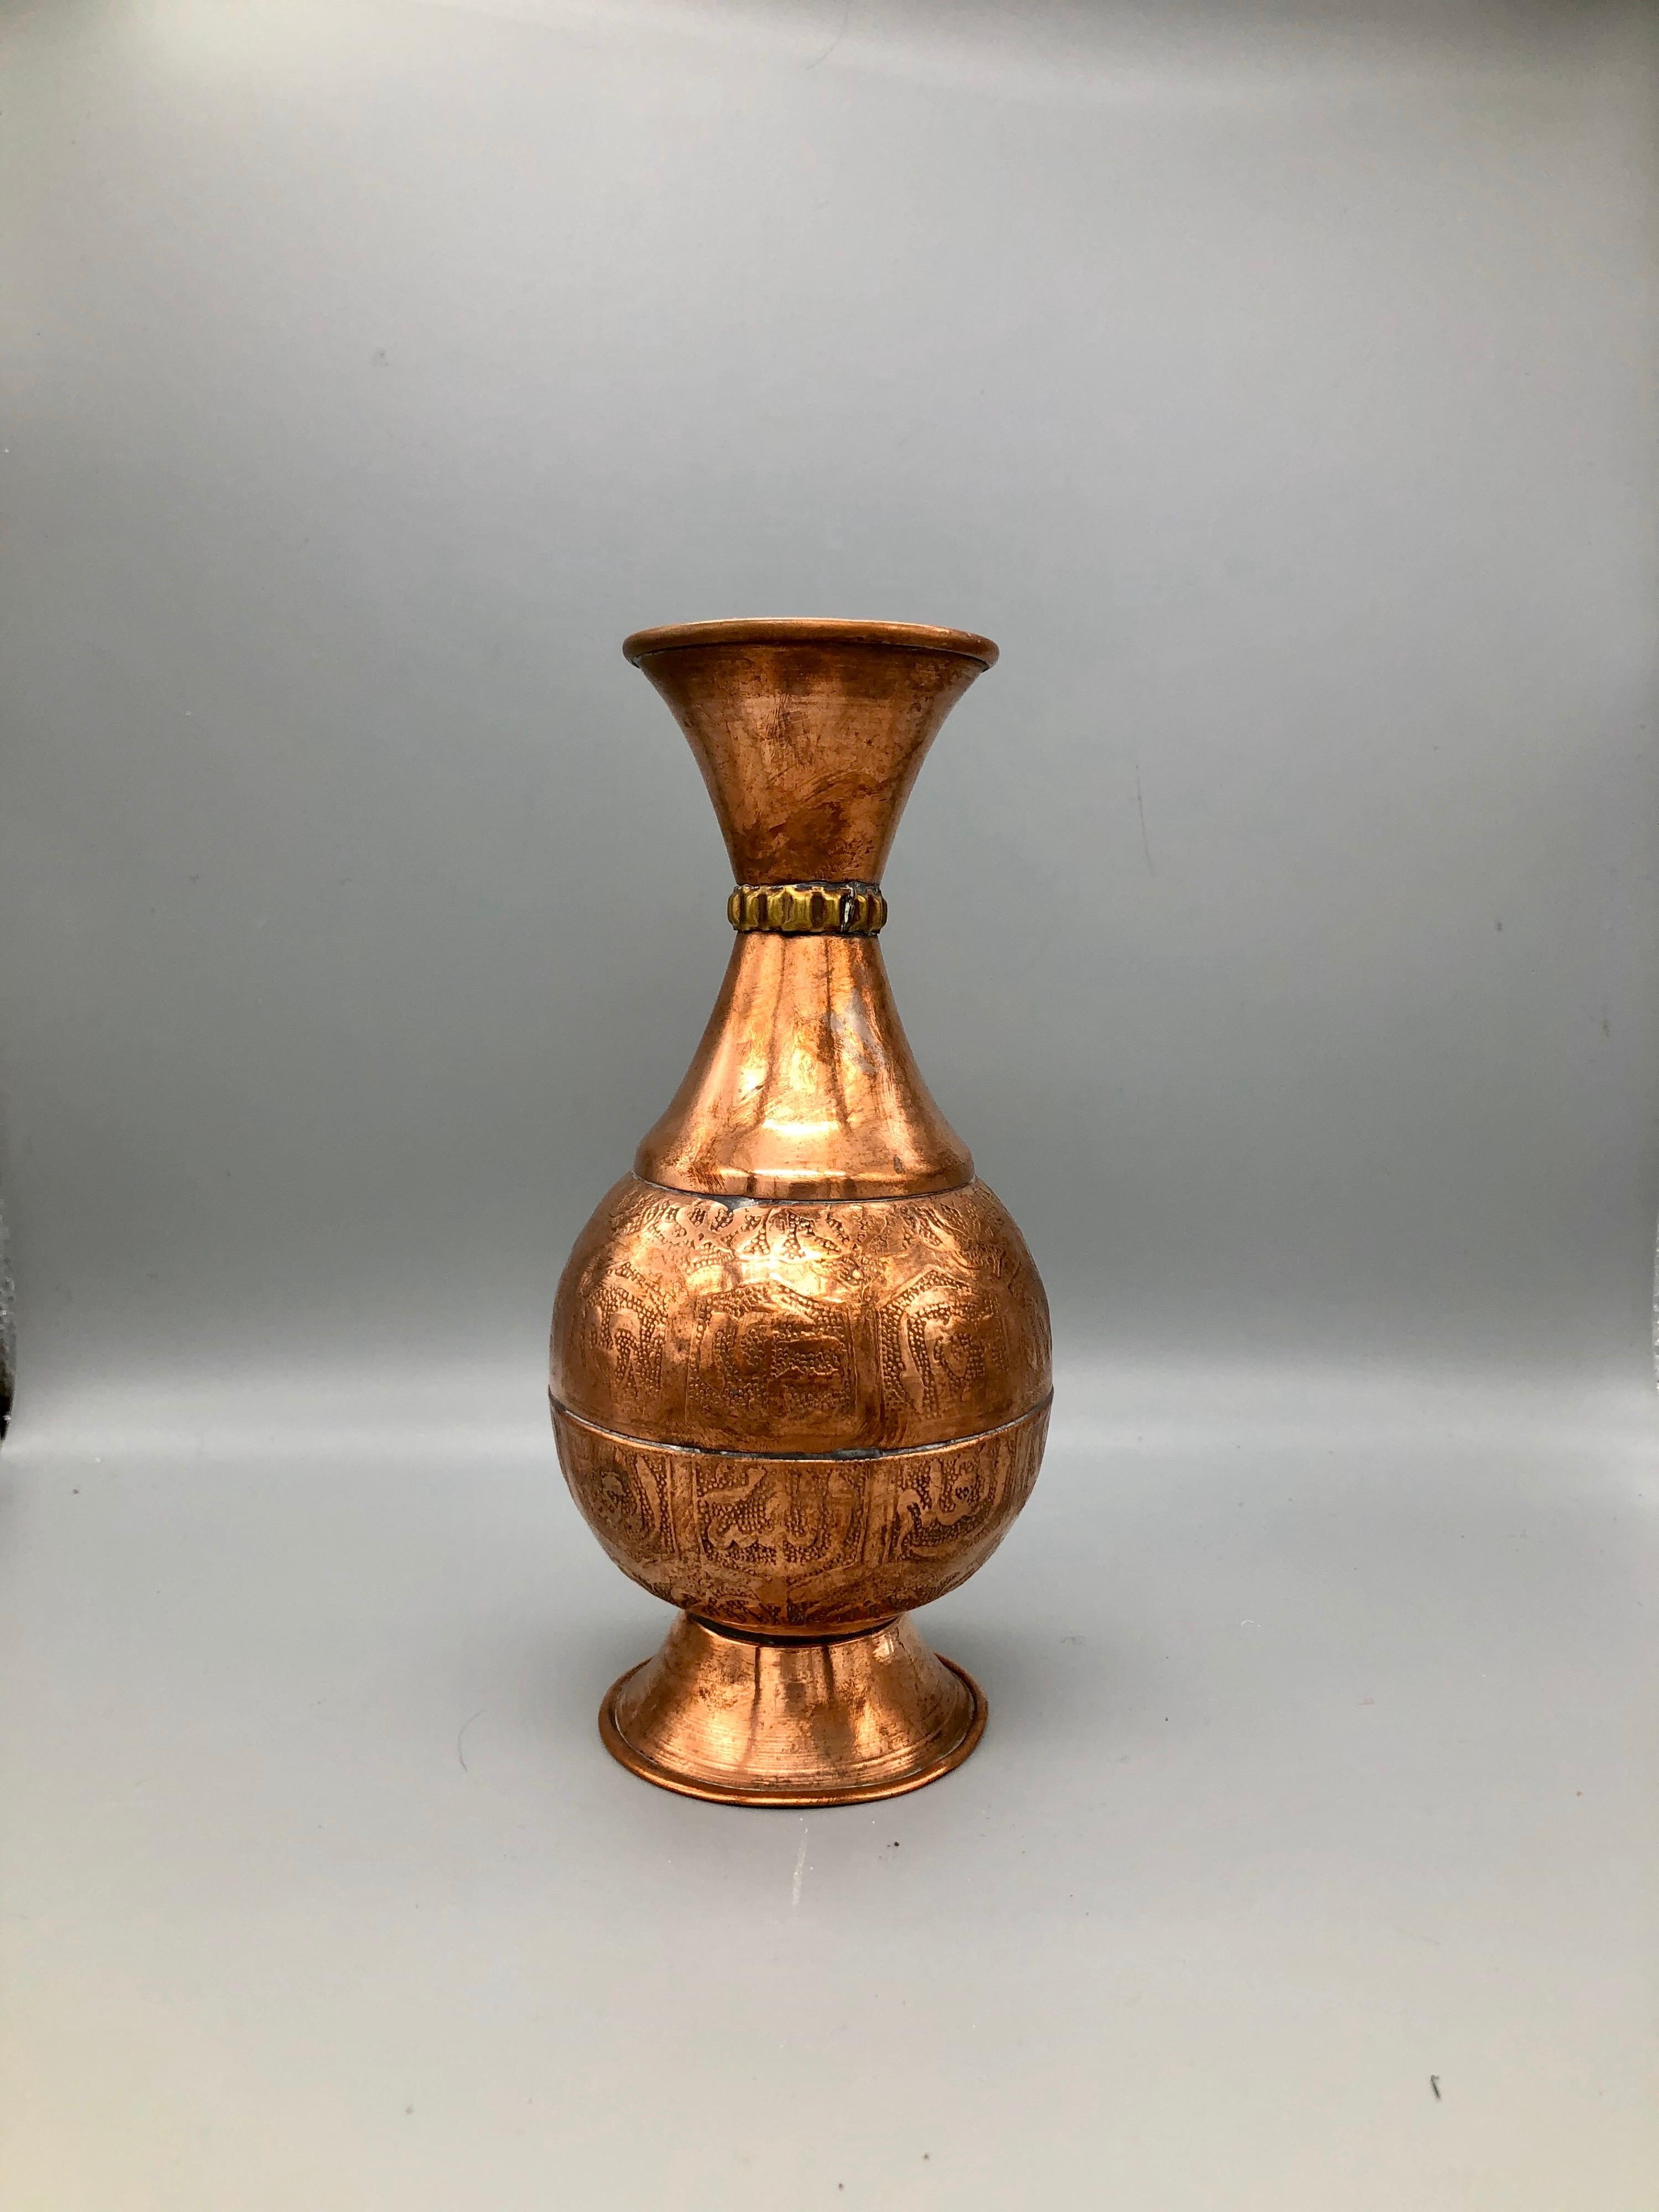 This shiny red copper Moroccan vase is specially reserved for Eid celebrations. Delicately hammered, the vase has a stippled effect, with raised Arabic repousse lettering. The vase has five distinct parts that have been permanently welded, with a